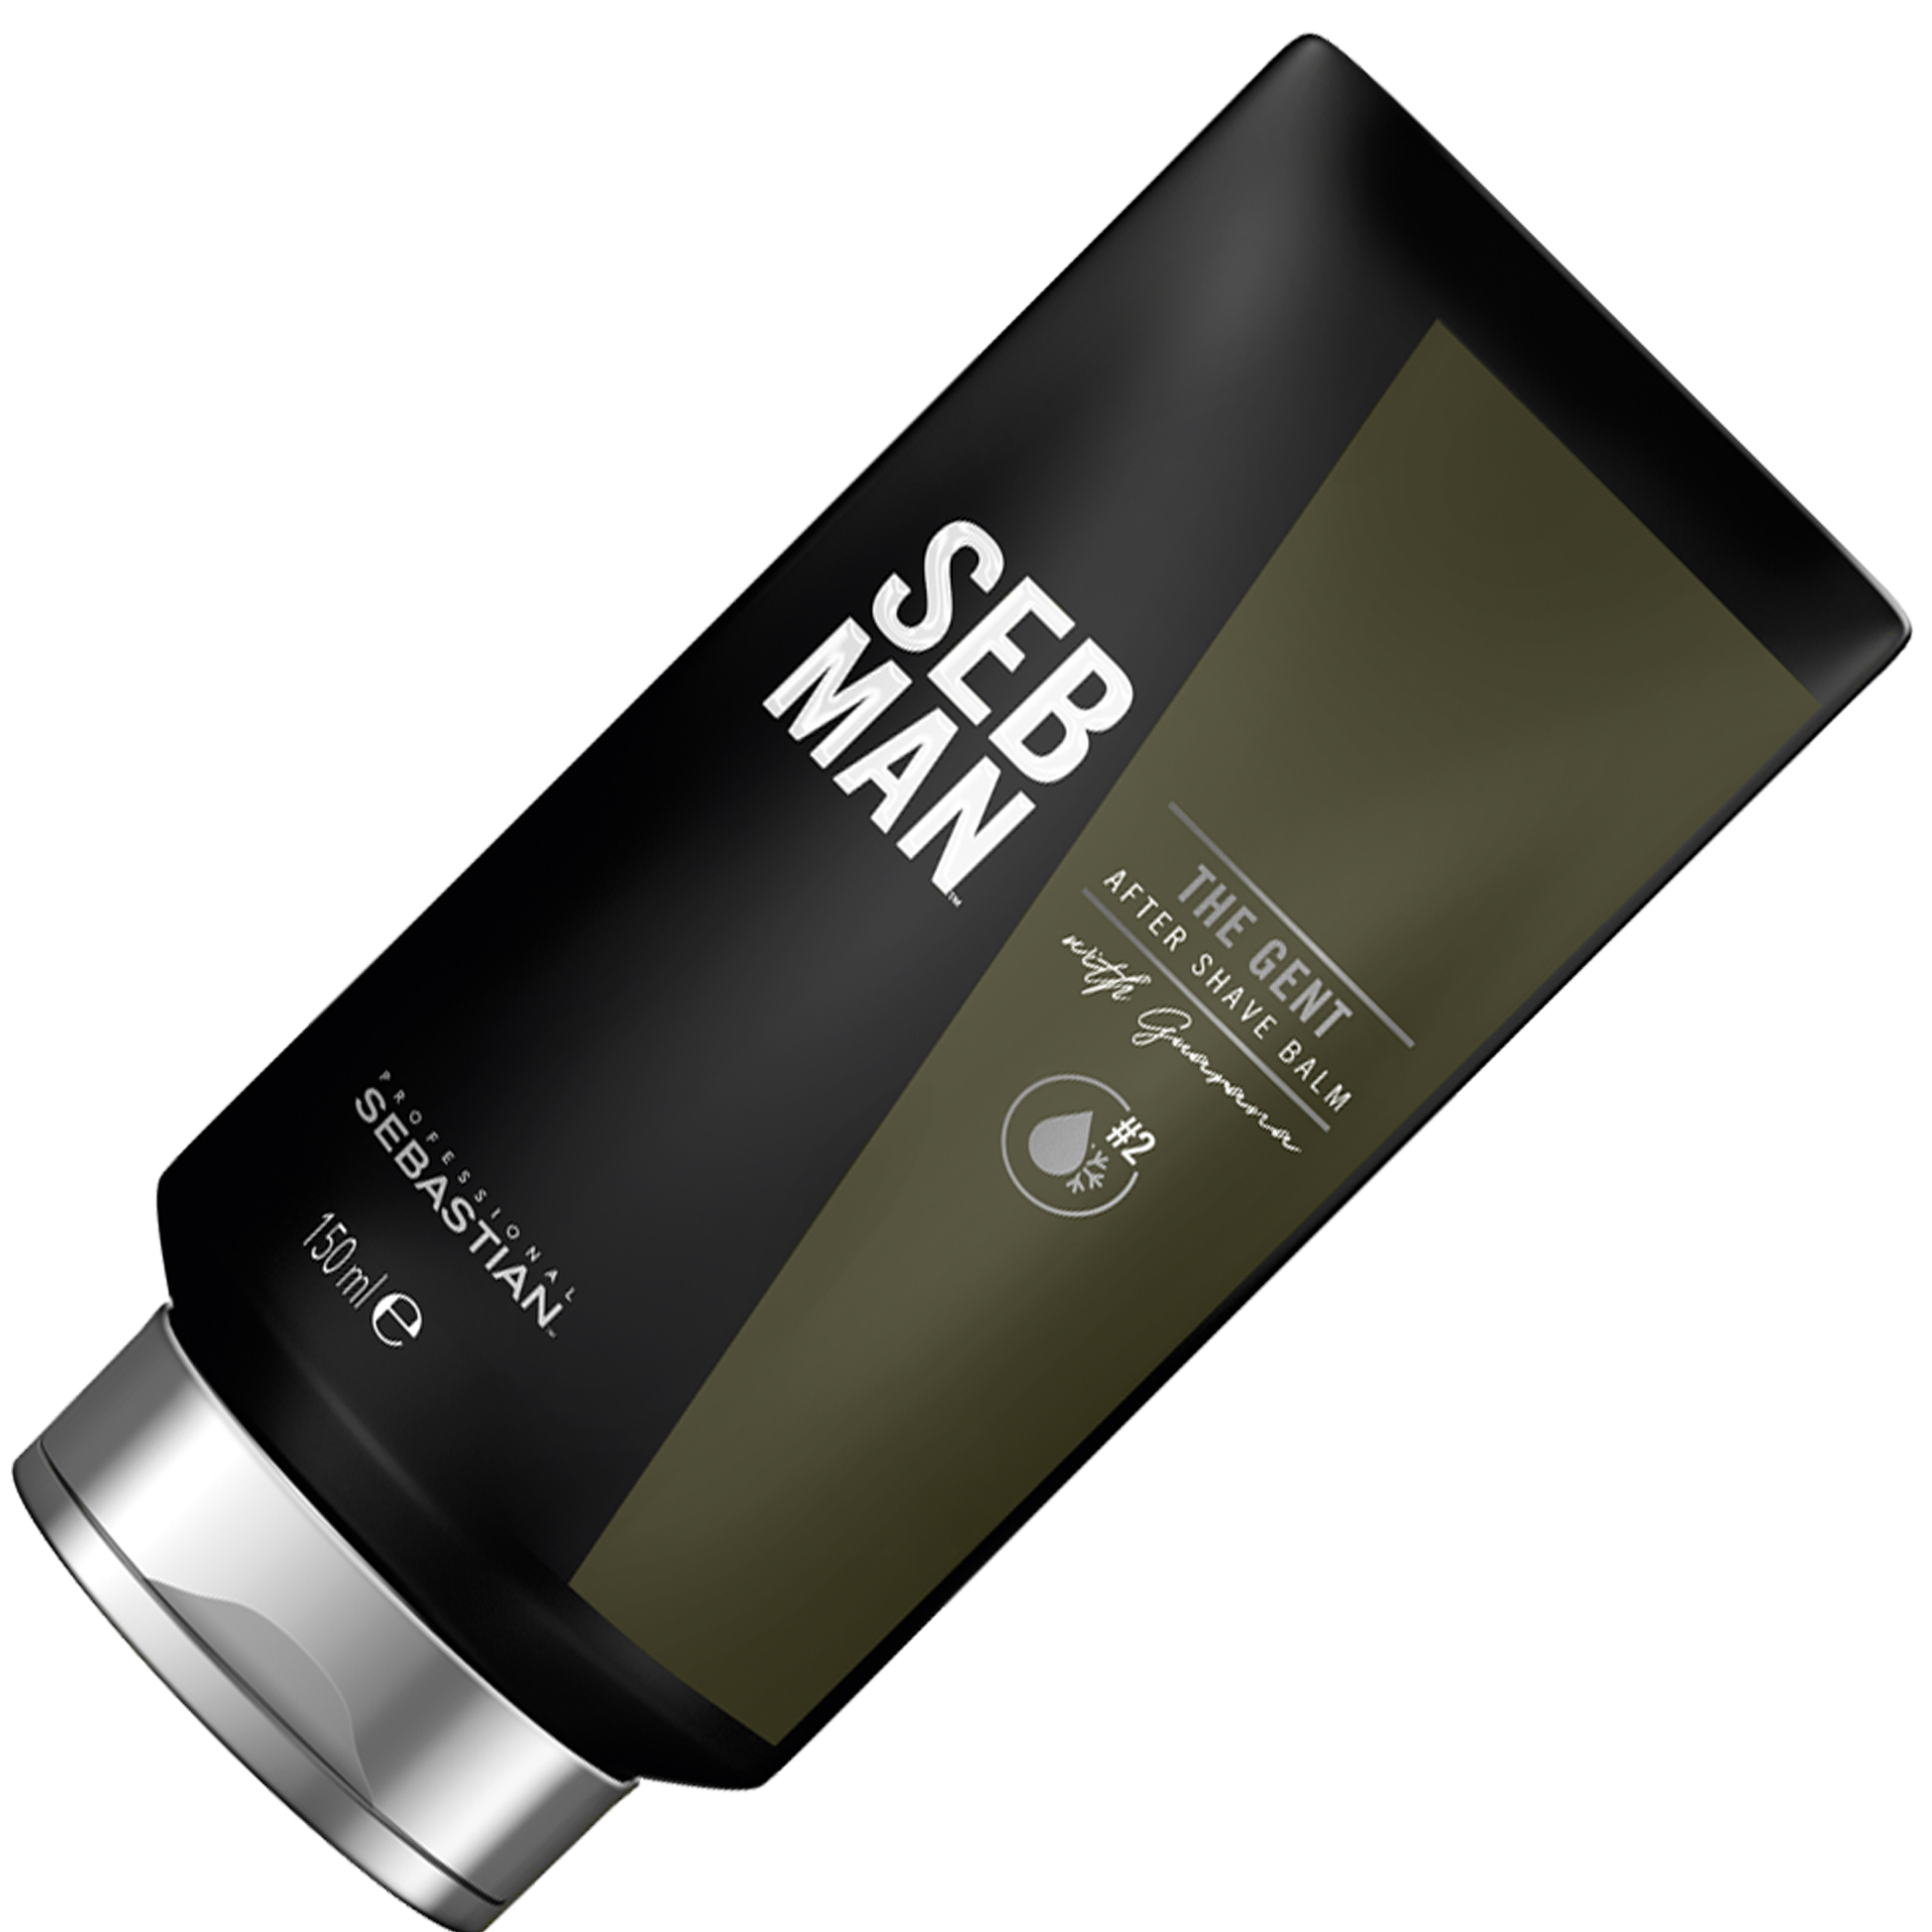 SEB MAN The Gent After Shave Balm (150ml)